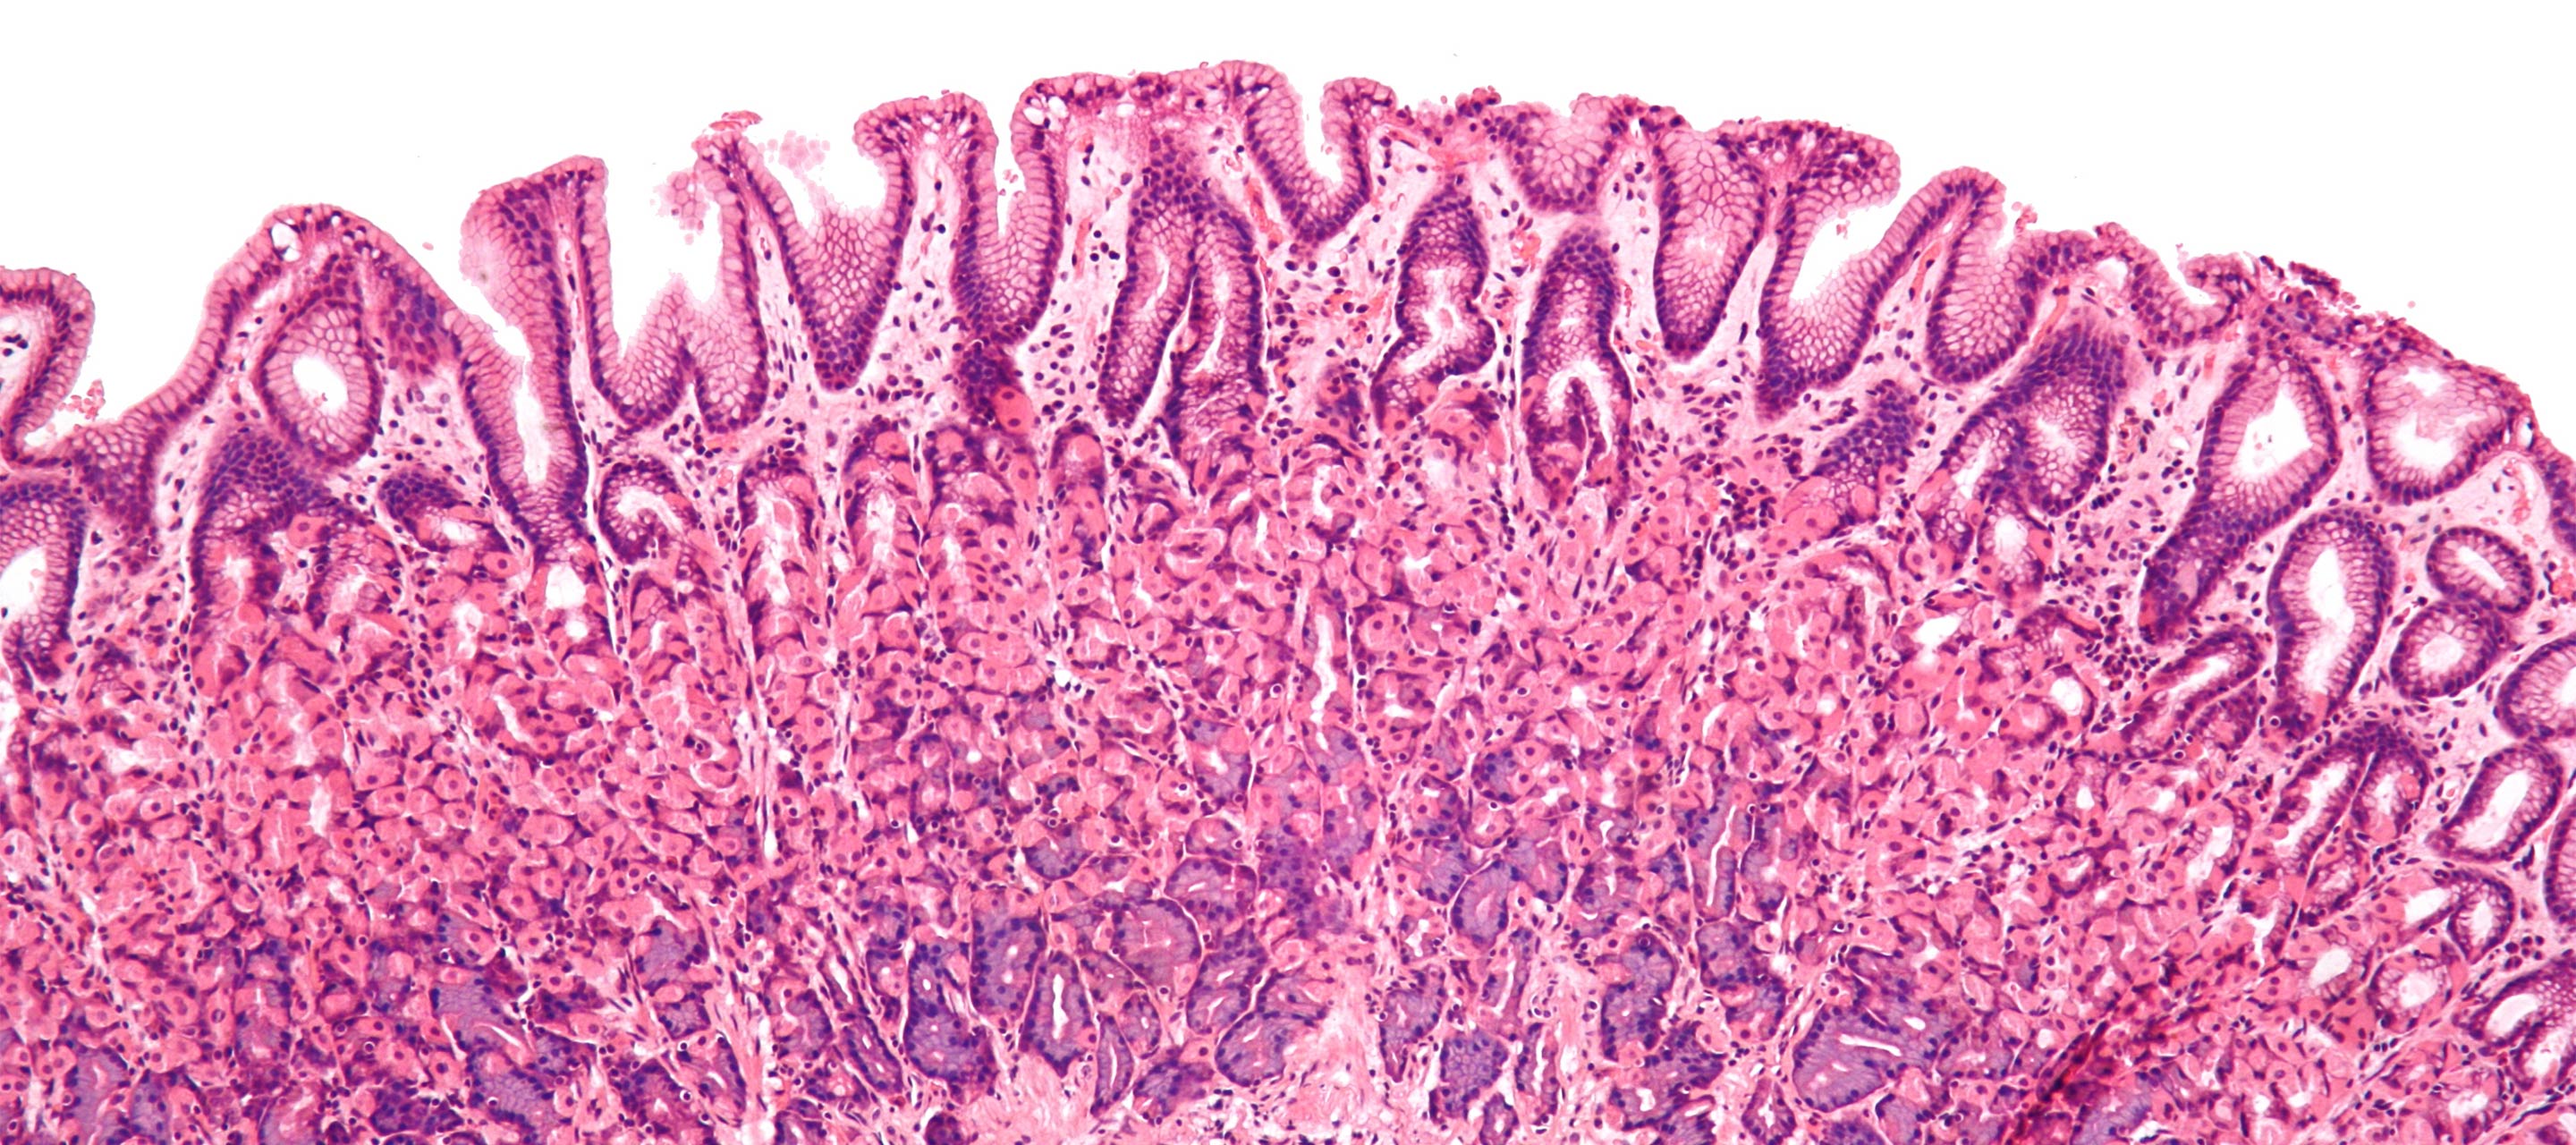 Gut lining under a microscope